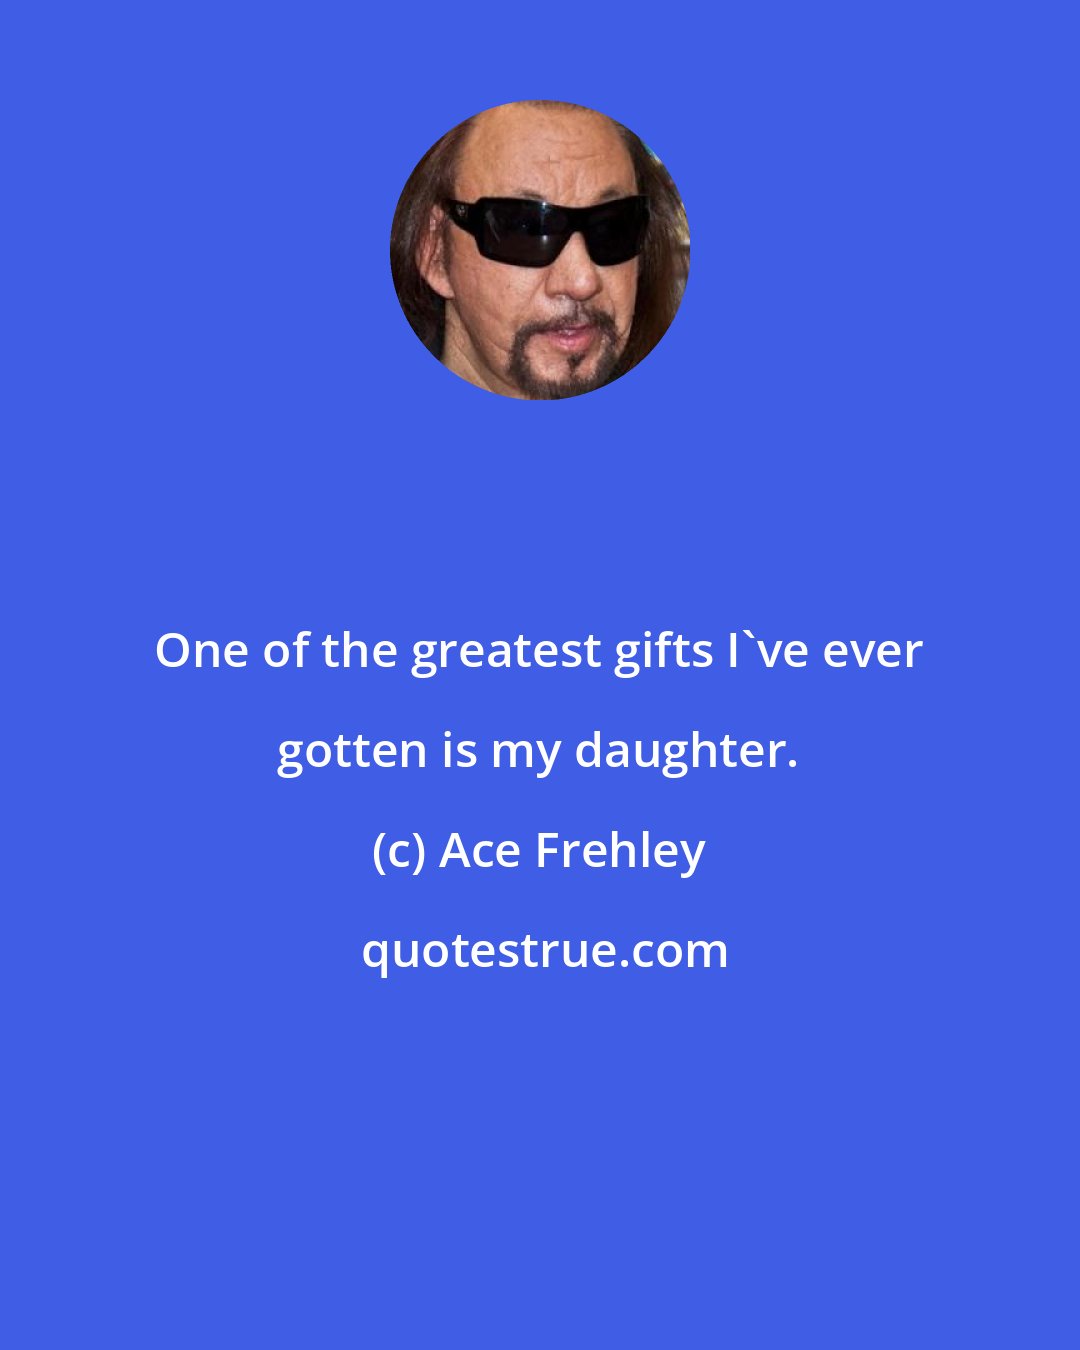 Ace Frehley: One of the greatest gifts I've ever gotten is my daughter.